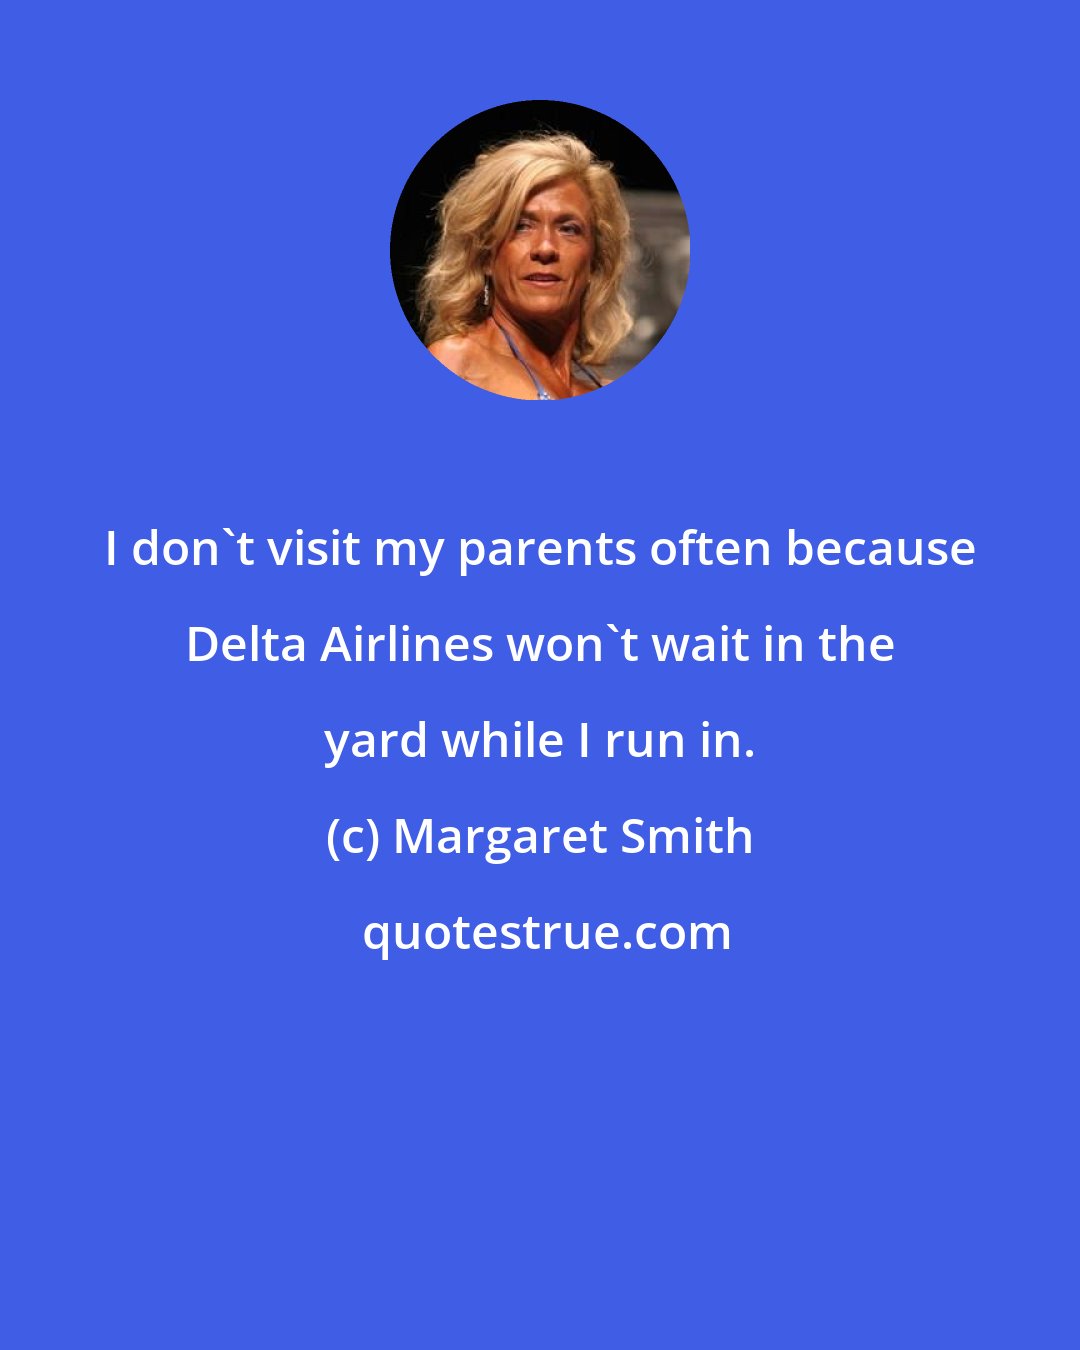 Margaret Smith: I don't visit my parents often because Delta Airlines won't wait in the yard while I run in.